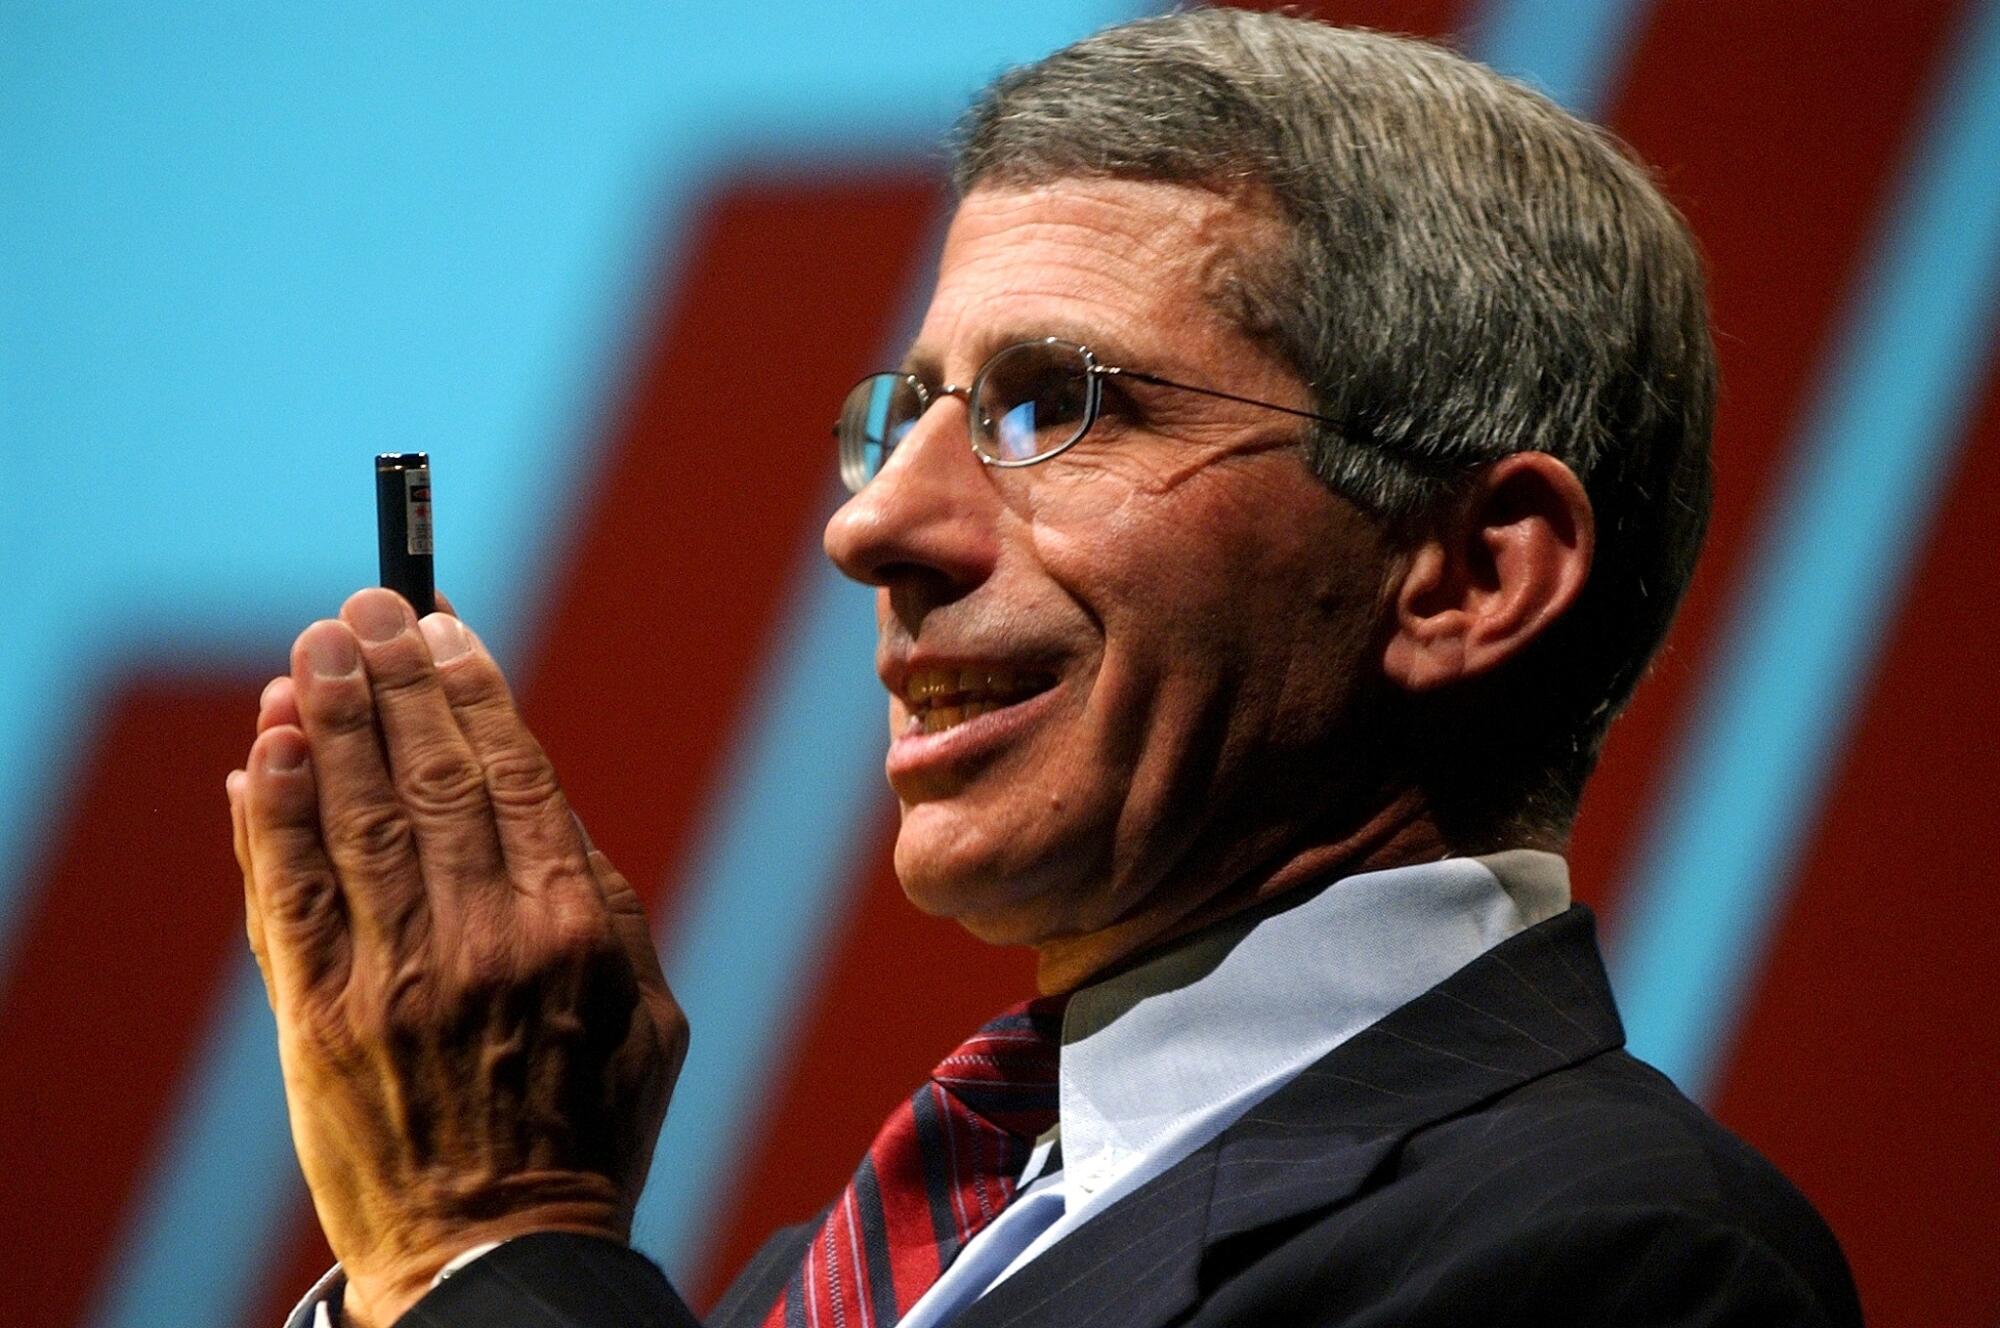 Dr. Anthony Fauci in 2004